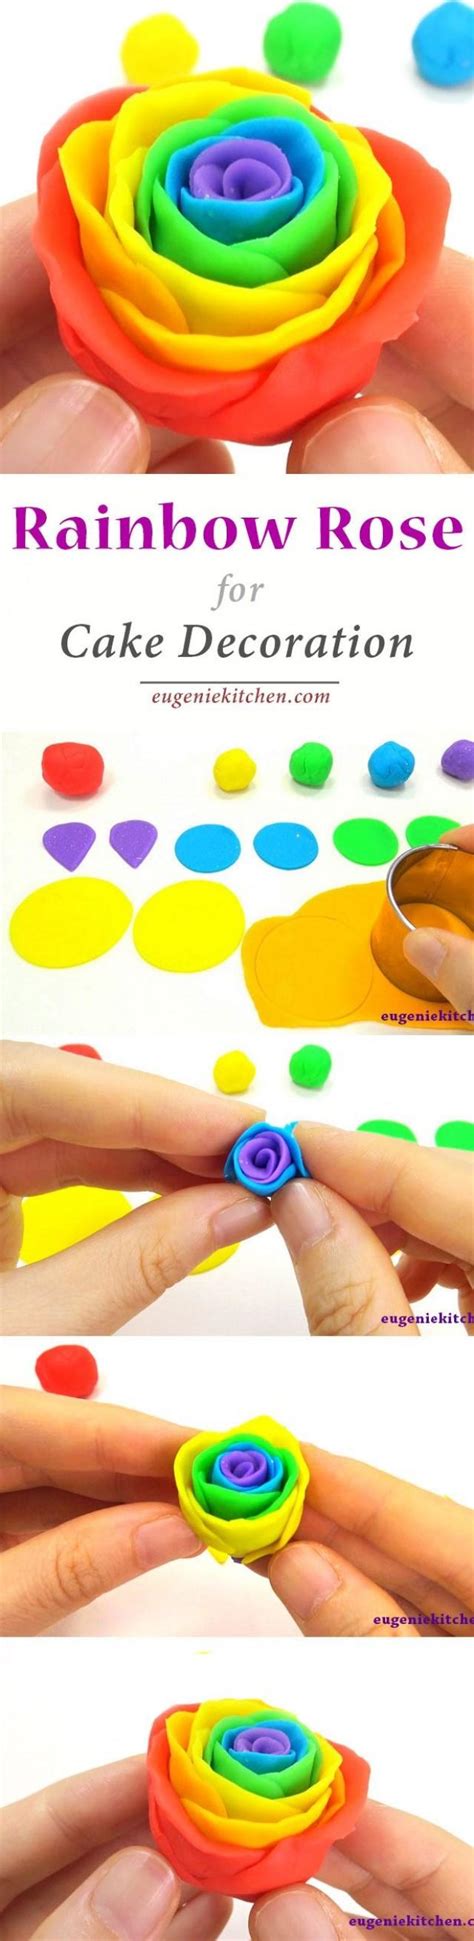 How To Make Rainbow Roses For Cake Decoration 2538831 Weddbook